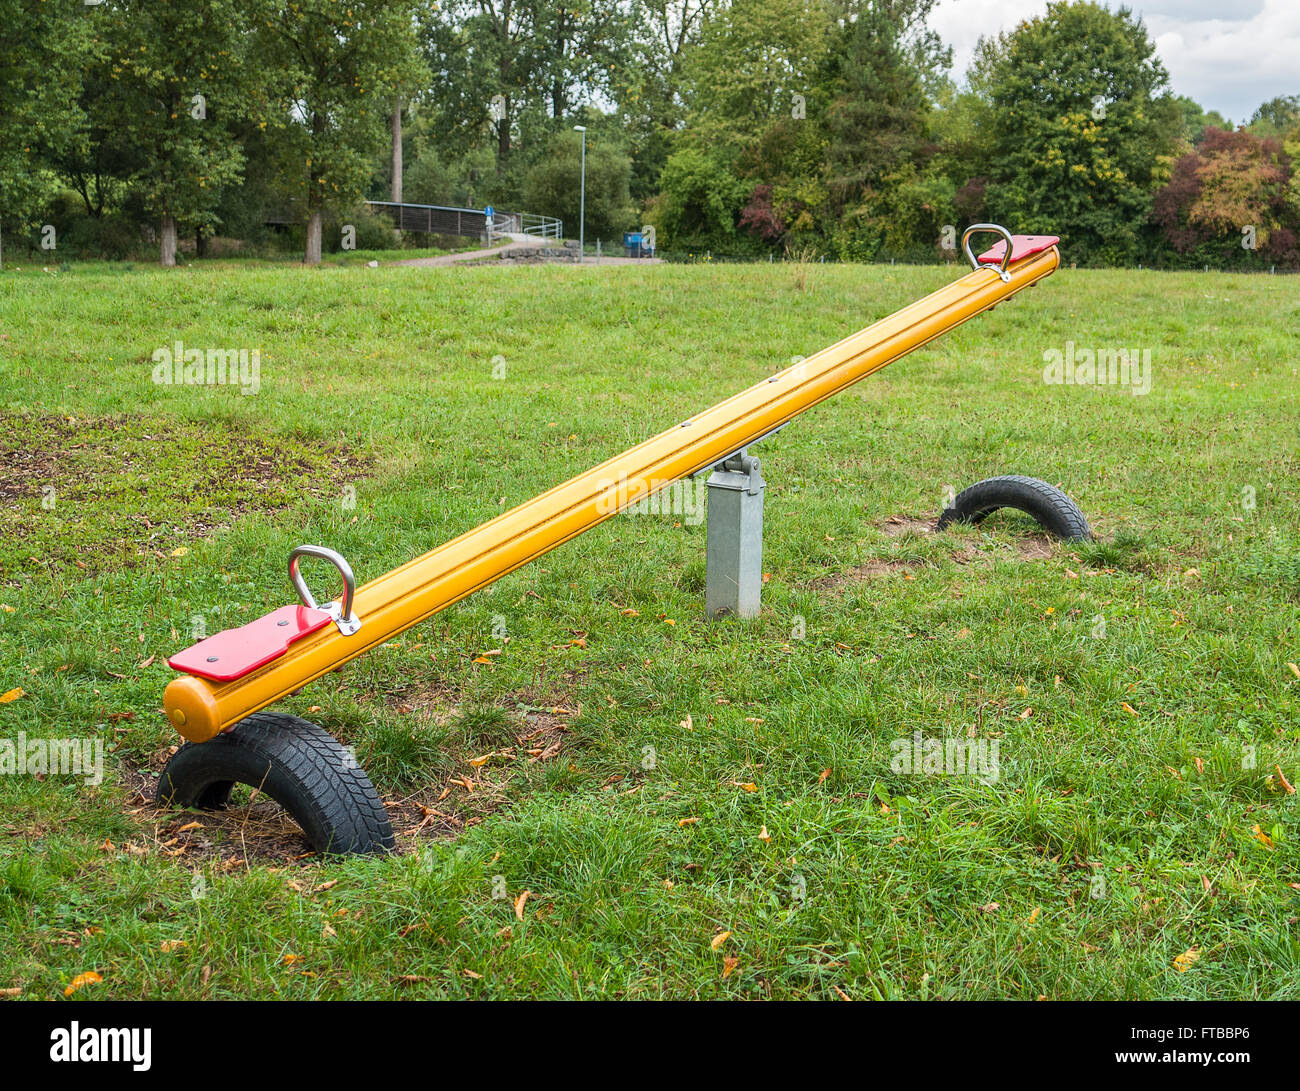 outdoor playground scenery with Seesaw, lawn and trees Stock Photo